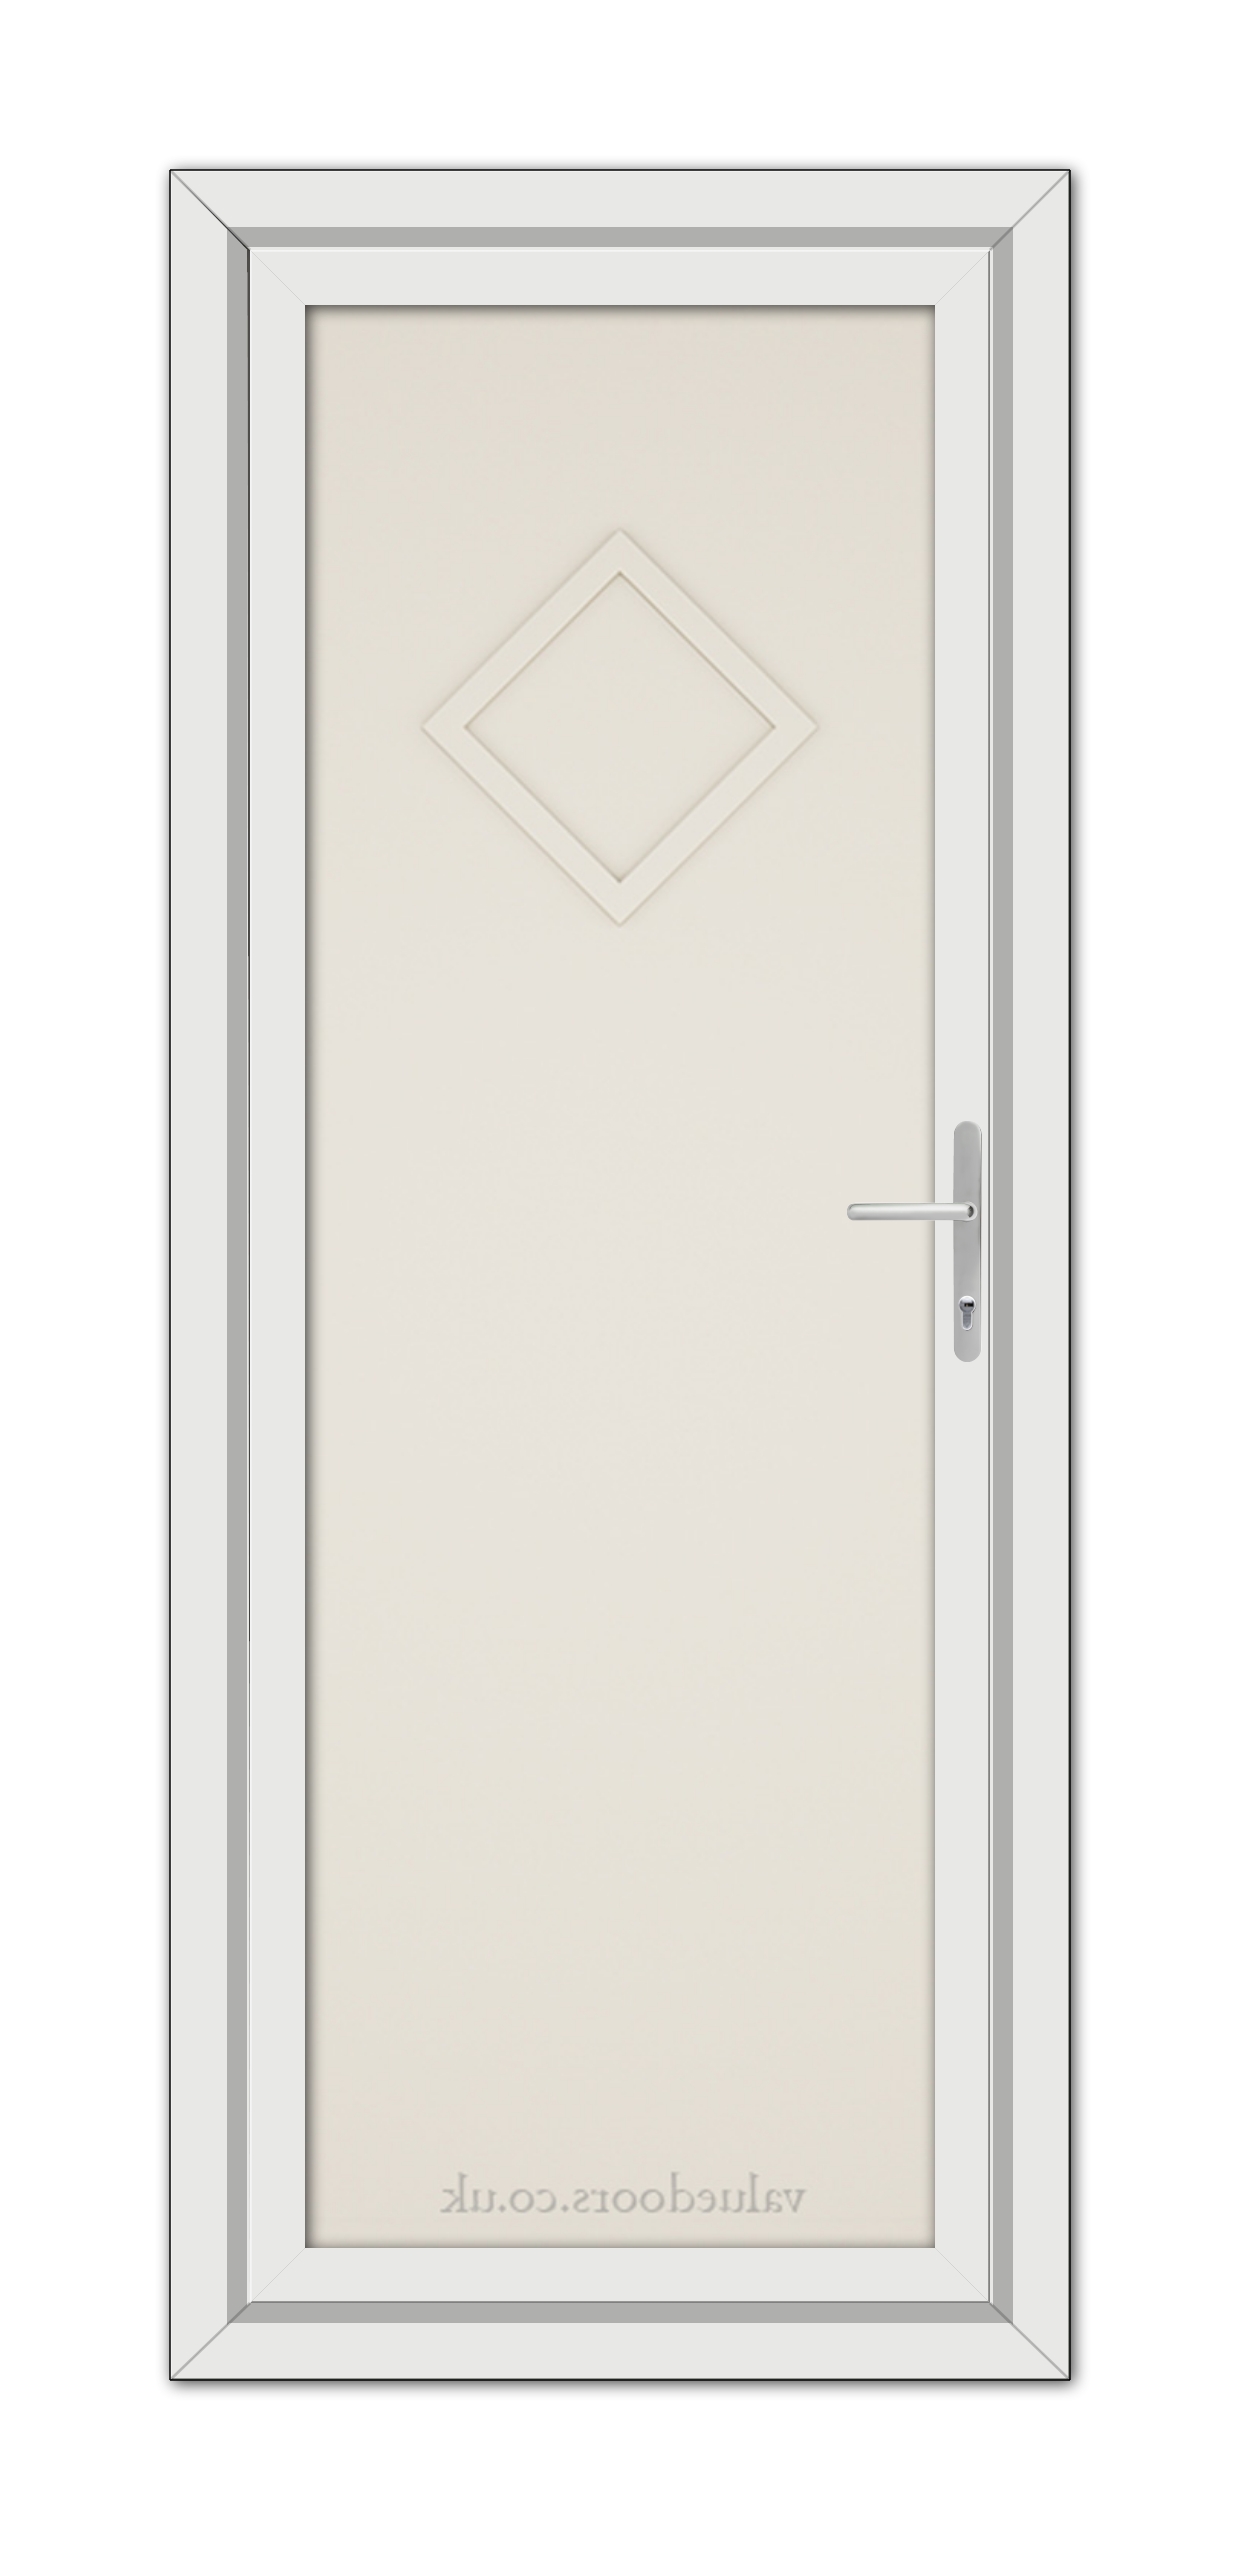 Vertical view of a closed Cream Modern 5131 Solid uPVC Door with a diamond-shaped window and a metallic handle, set in a white frame.